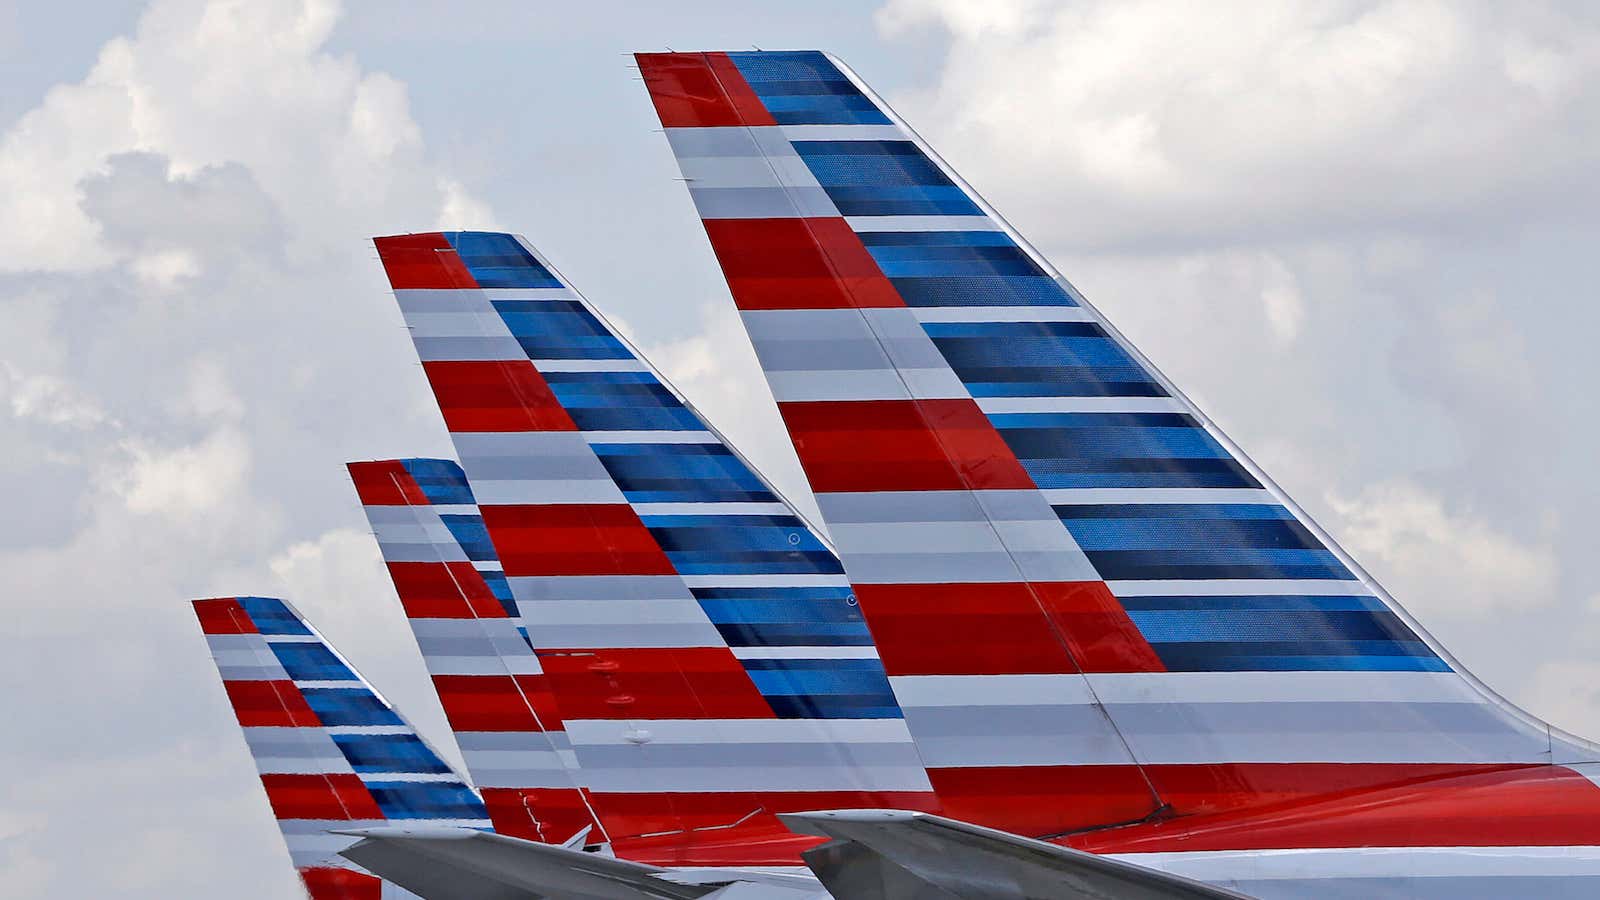 American Airlines’ CEO says he aims to run the business like a startup.